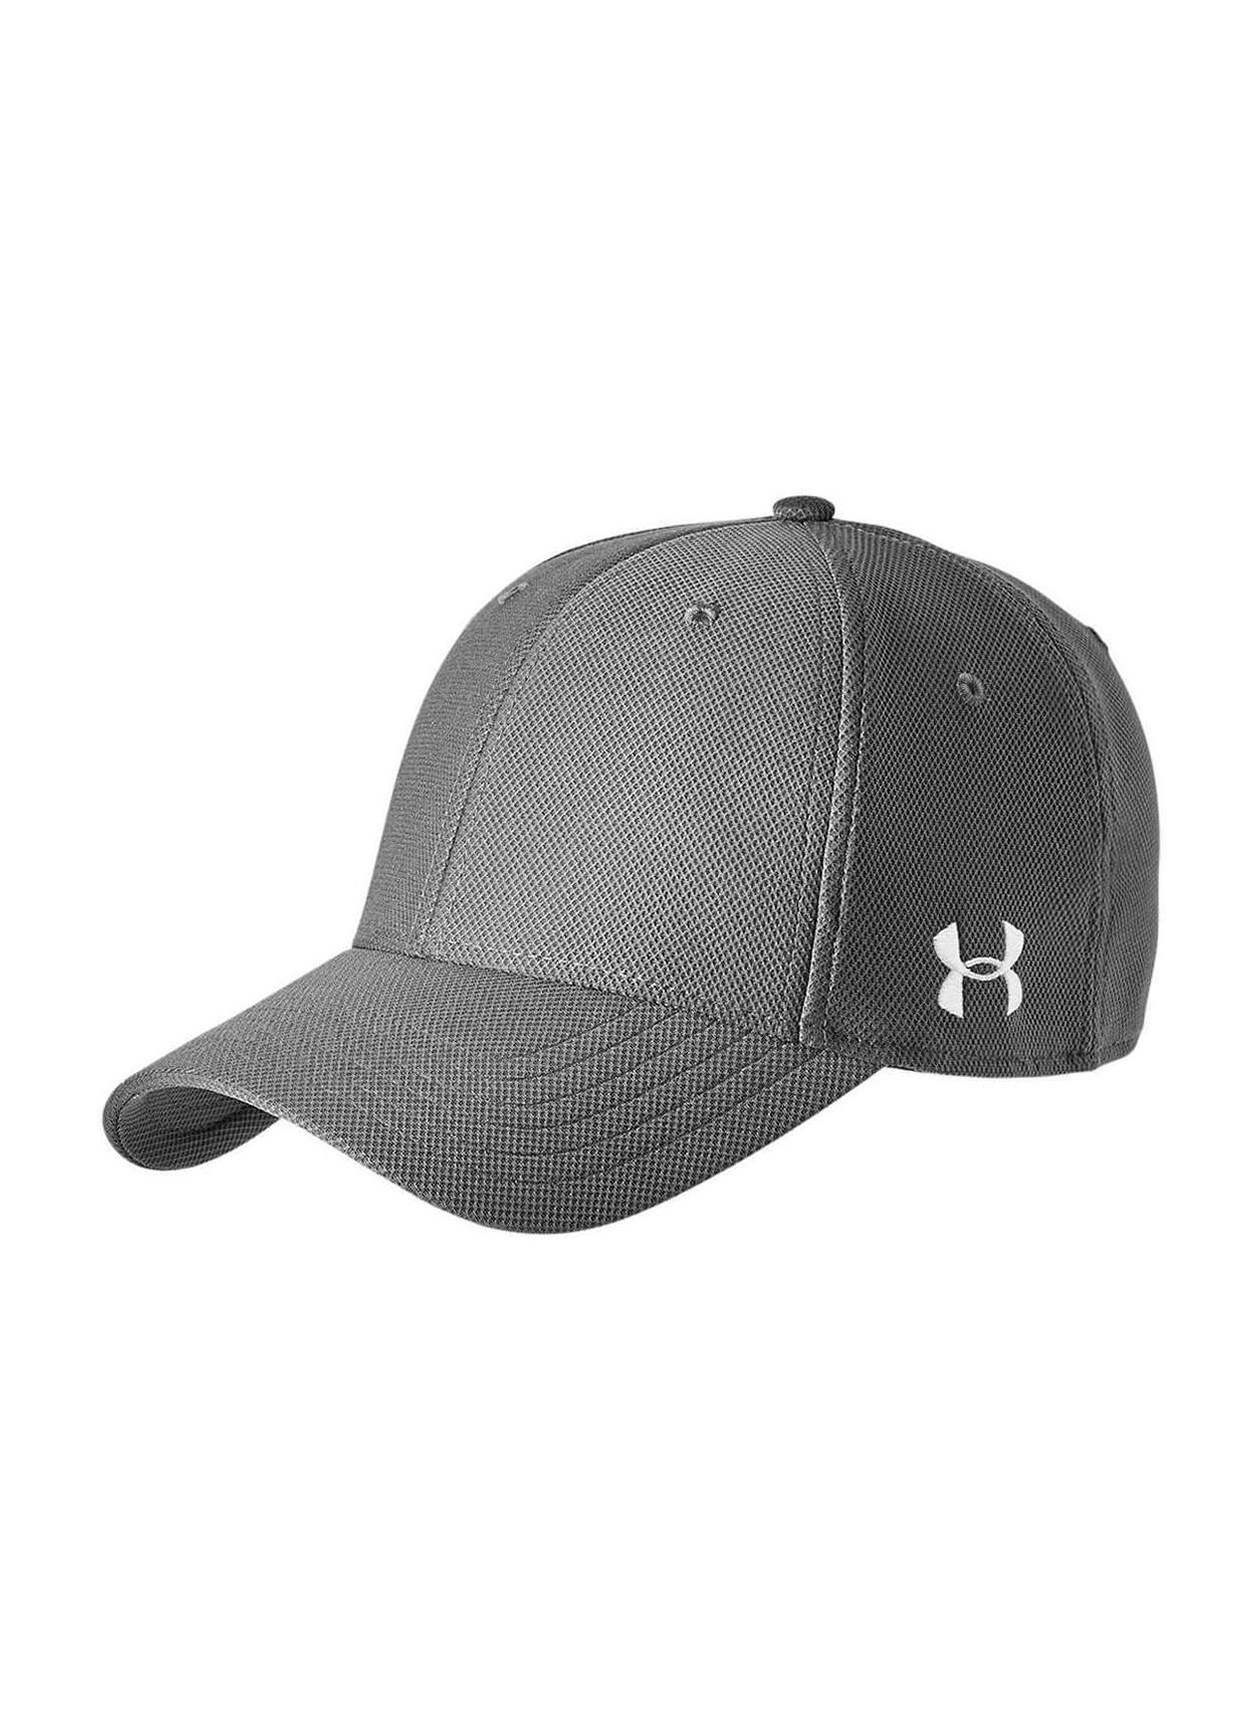 Under Armour Graphite Blitzing Curved Hat